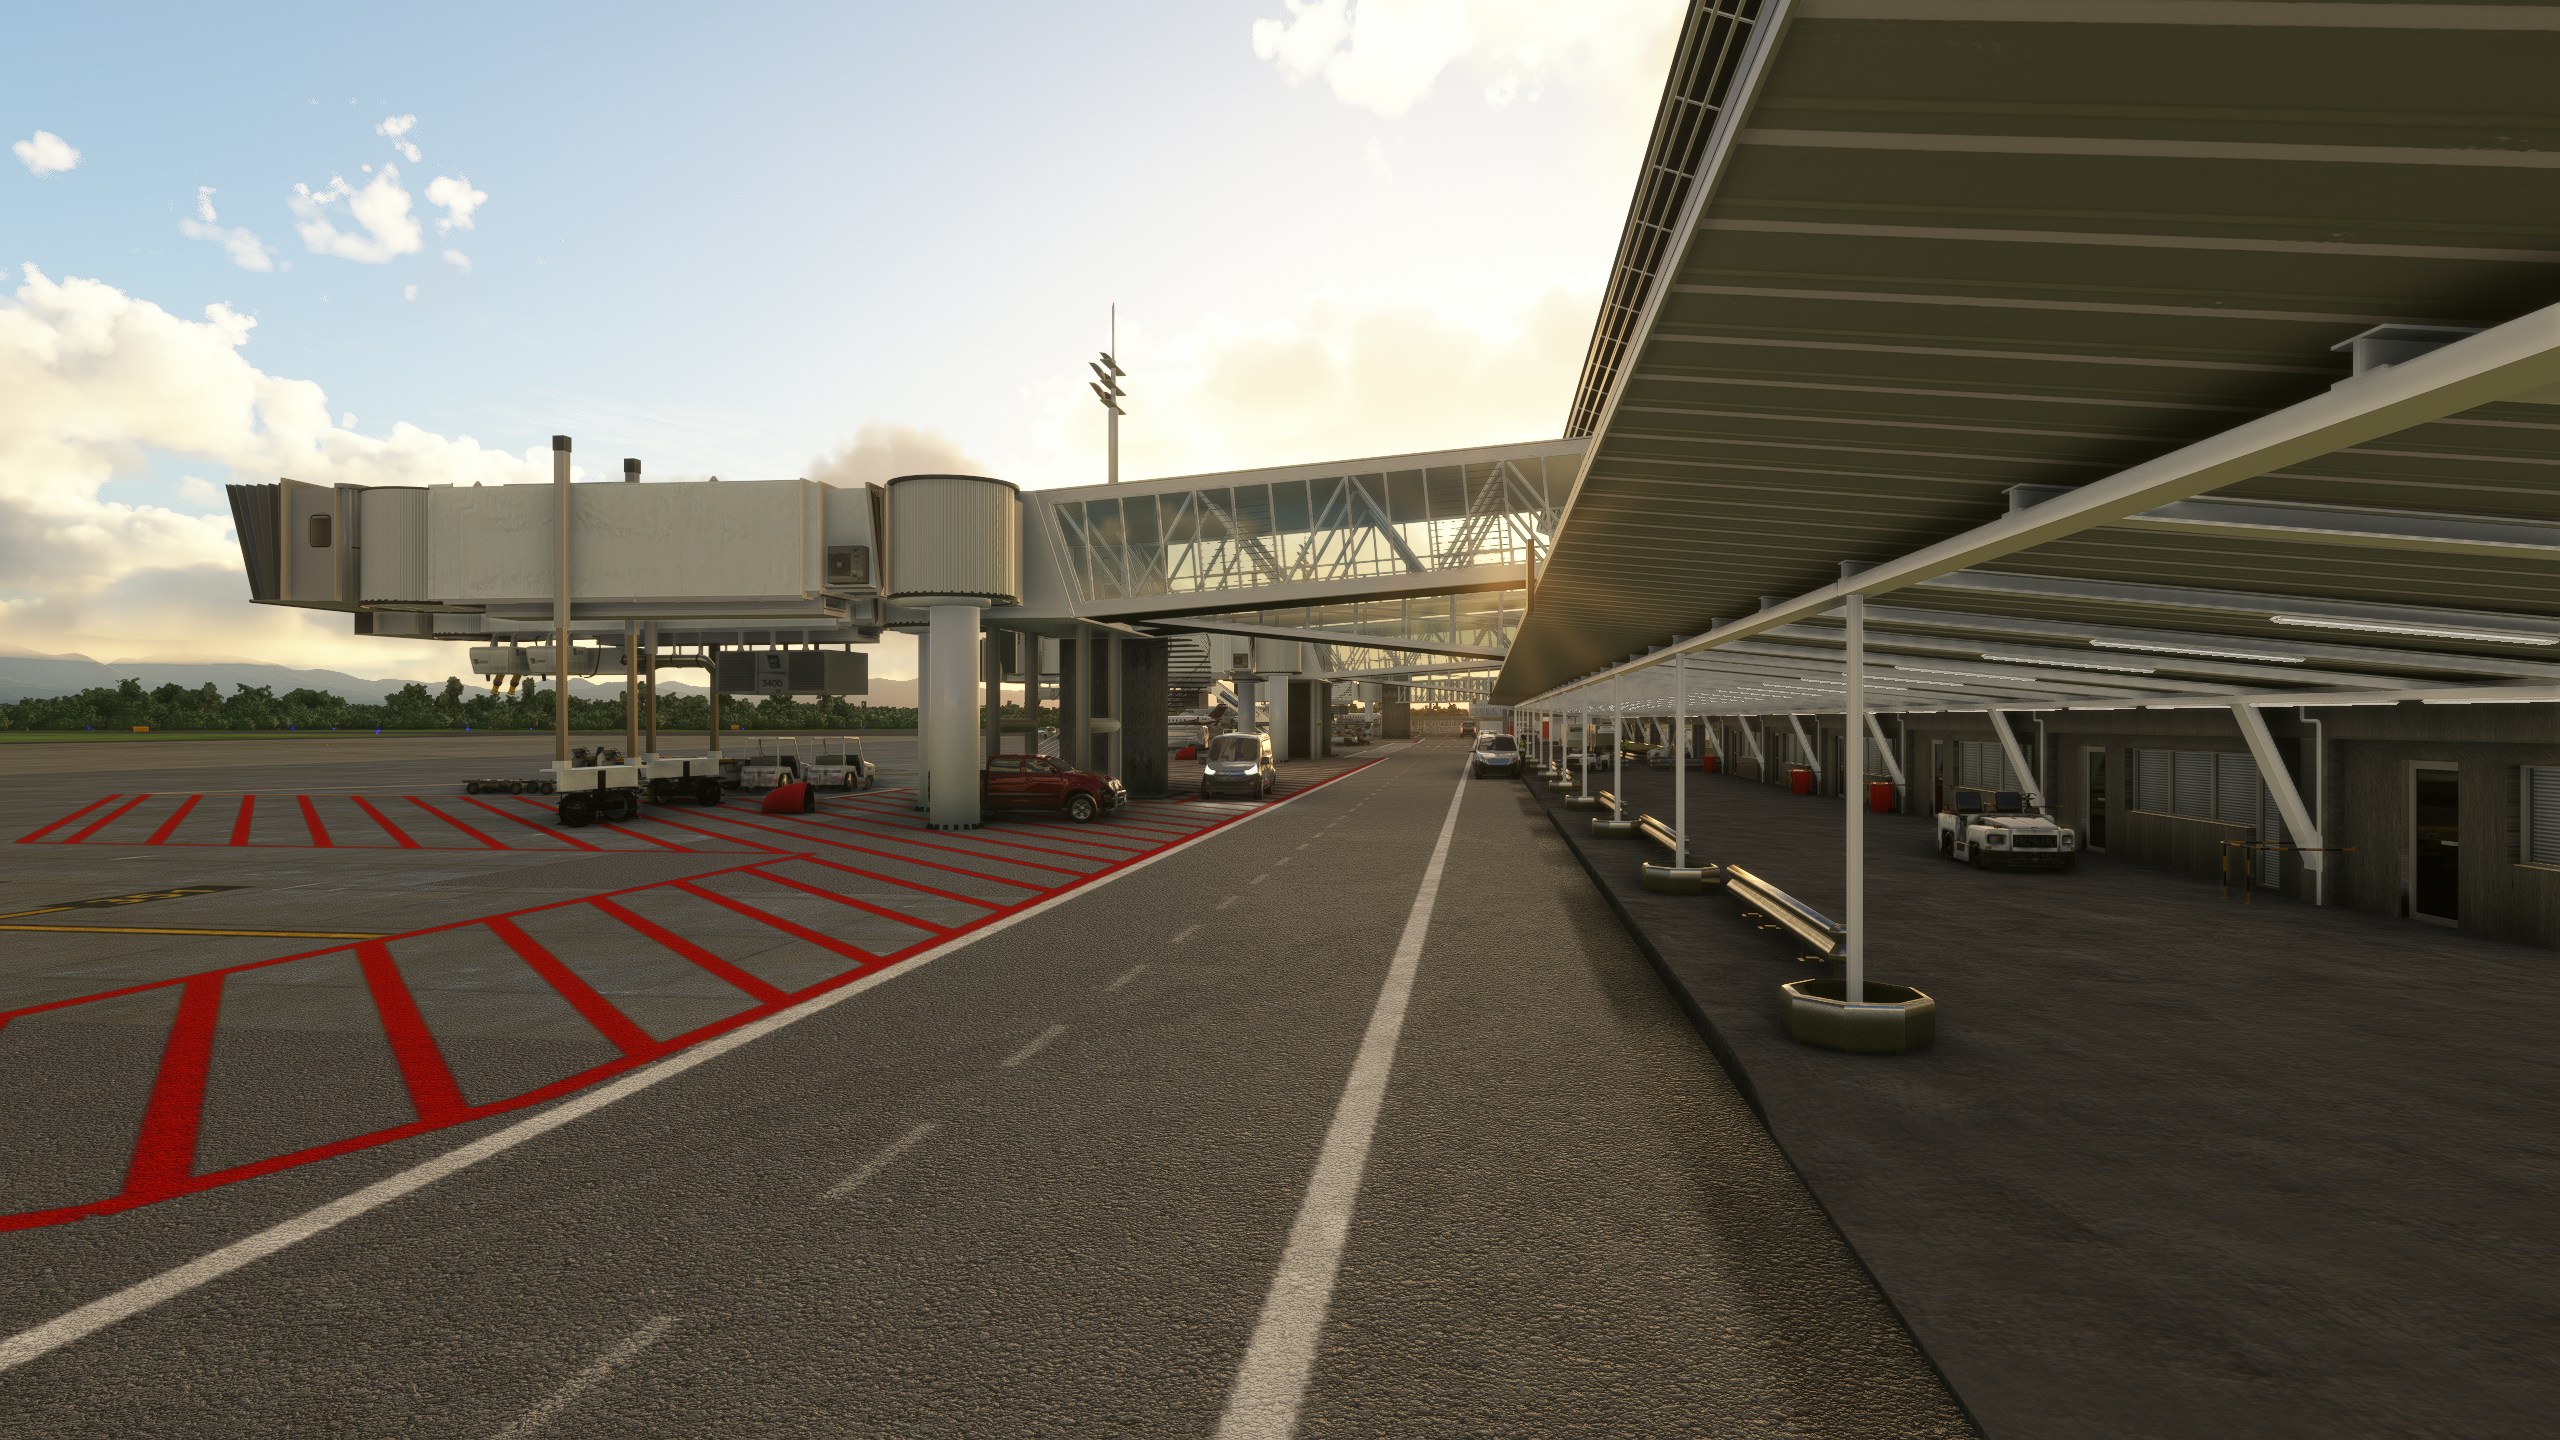 SLH Sim Designs has Released Pointe- A-Pitre Le Raizet Airport for MSFS